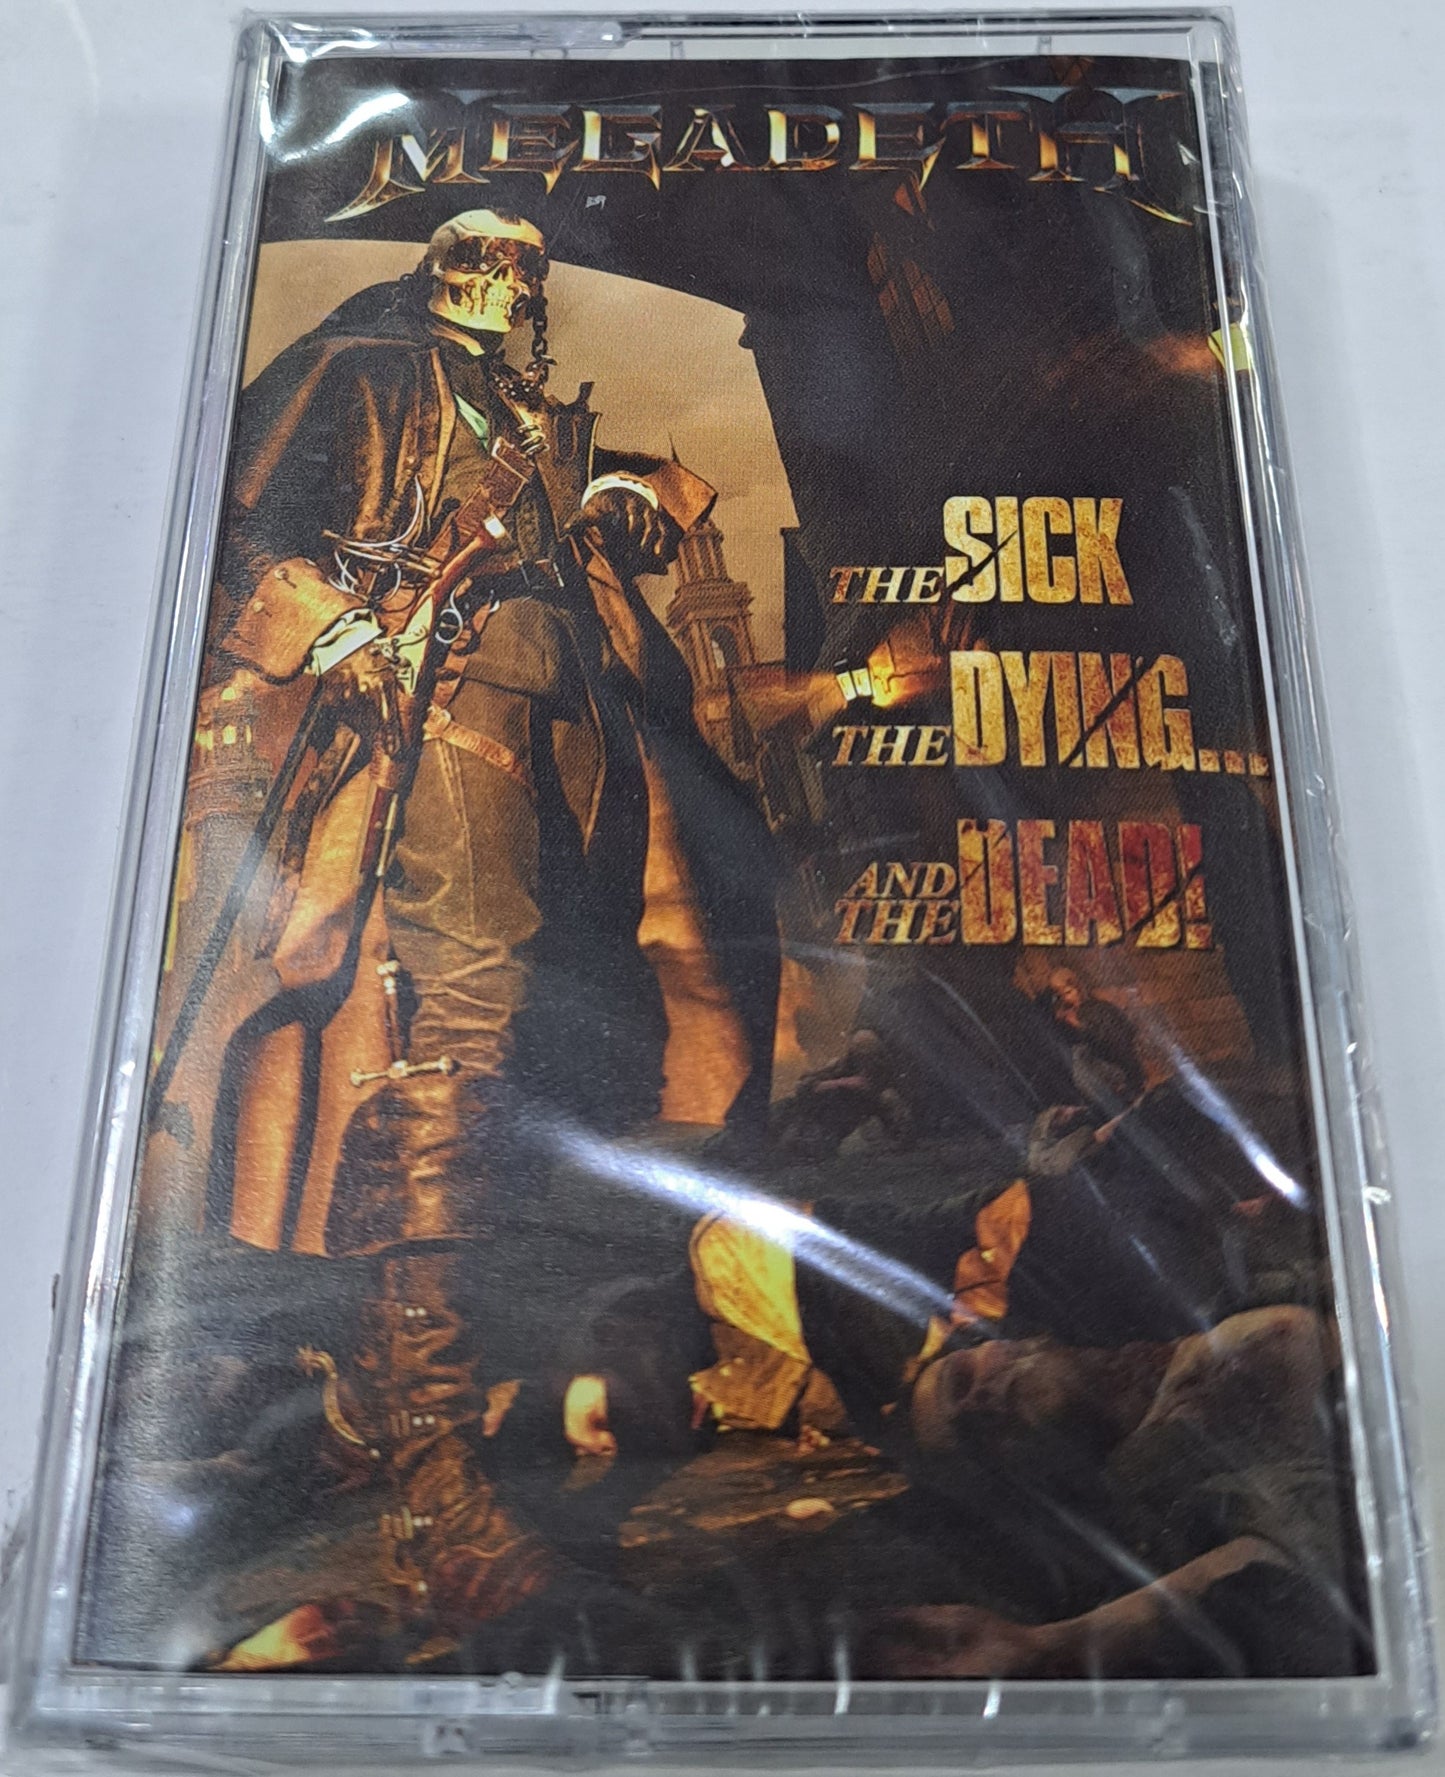 MEGADETH - THE SICK THE DYING AND THE DEAD CASSETTE